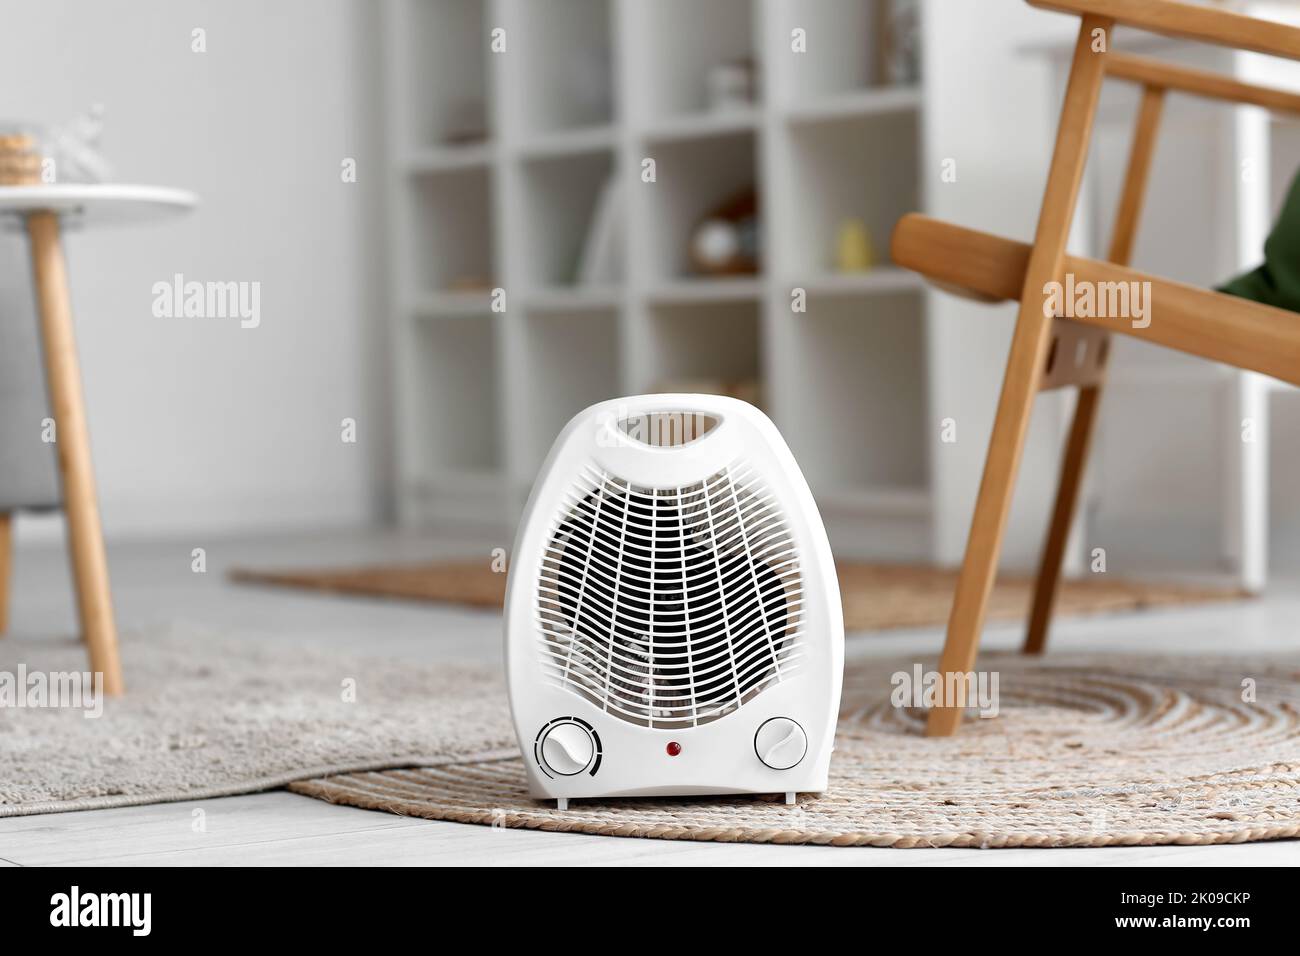 Electric fan heater on rug in living room Stock Photo